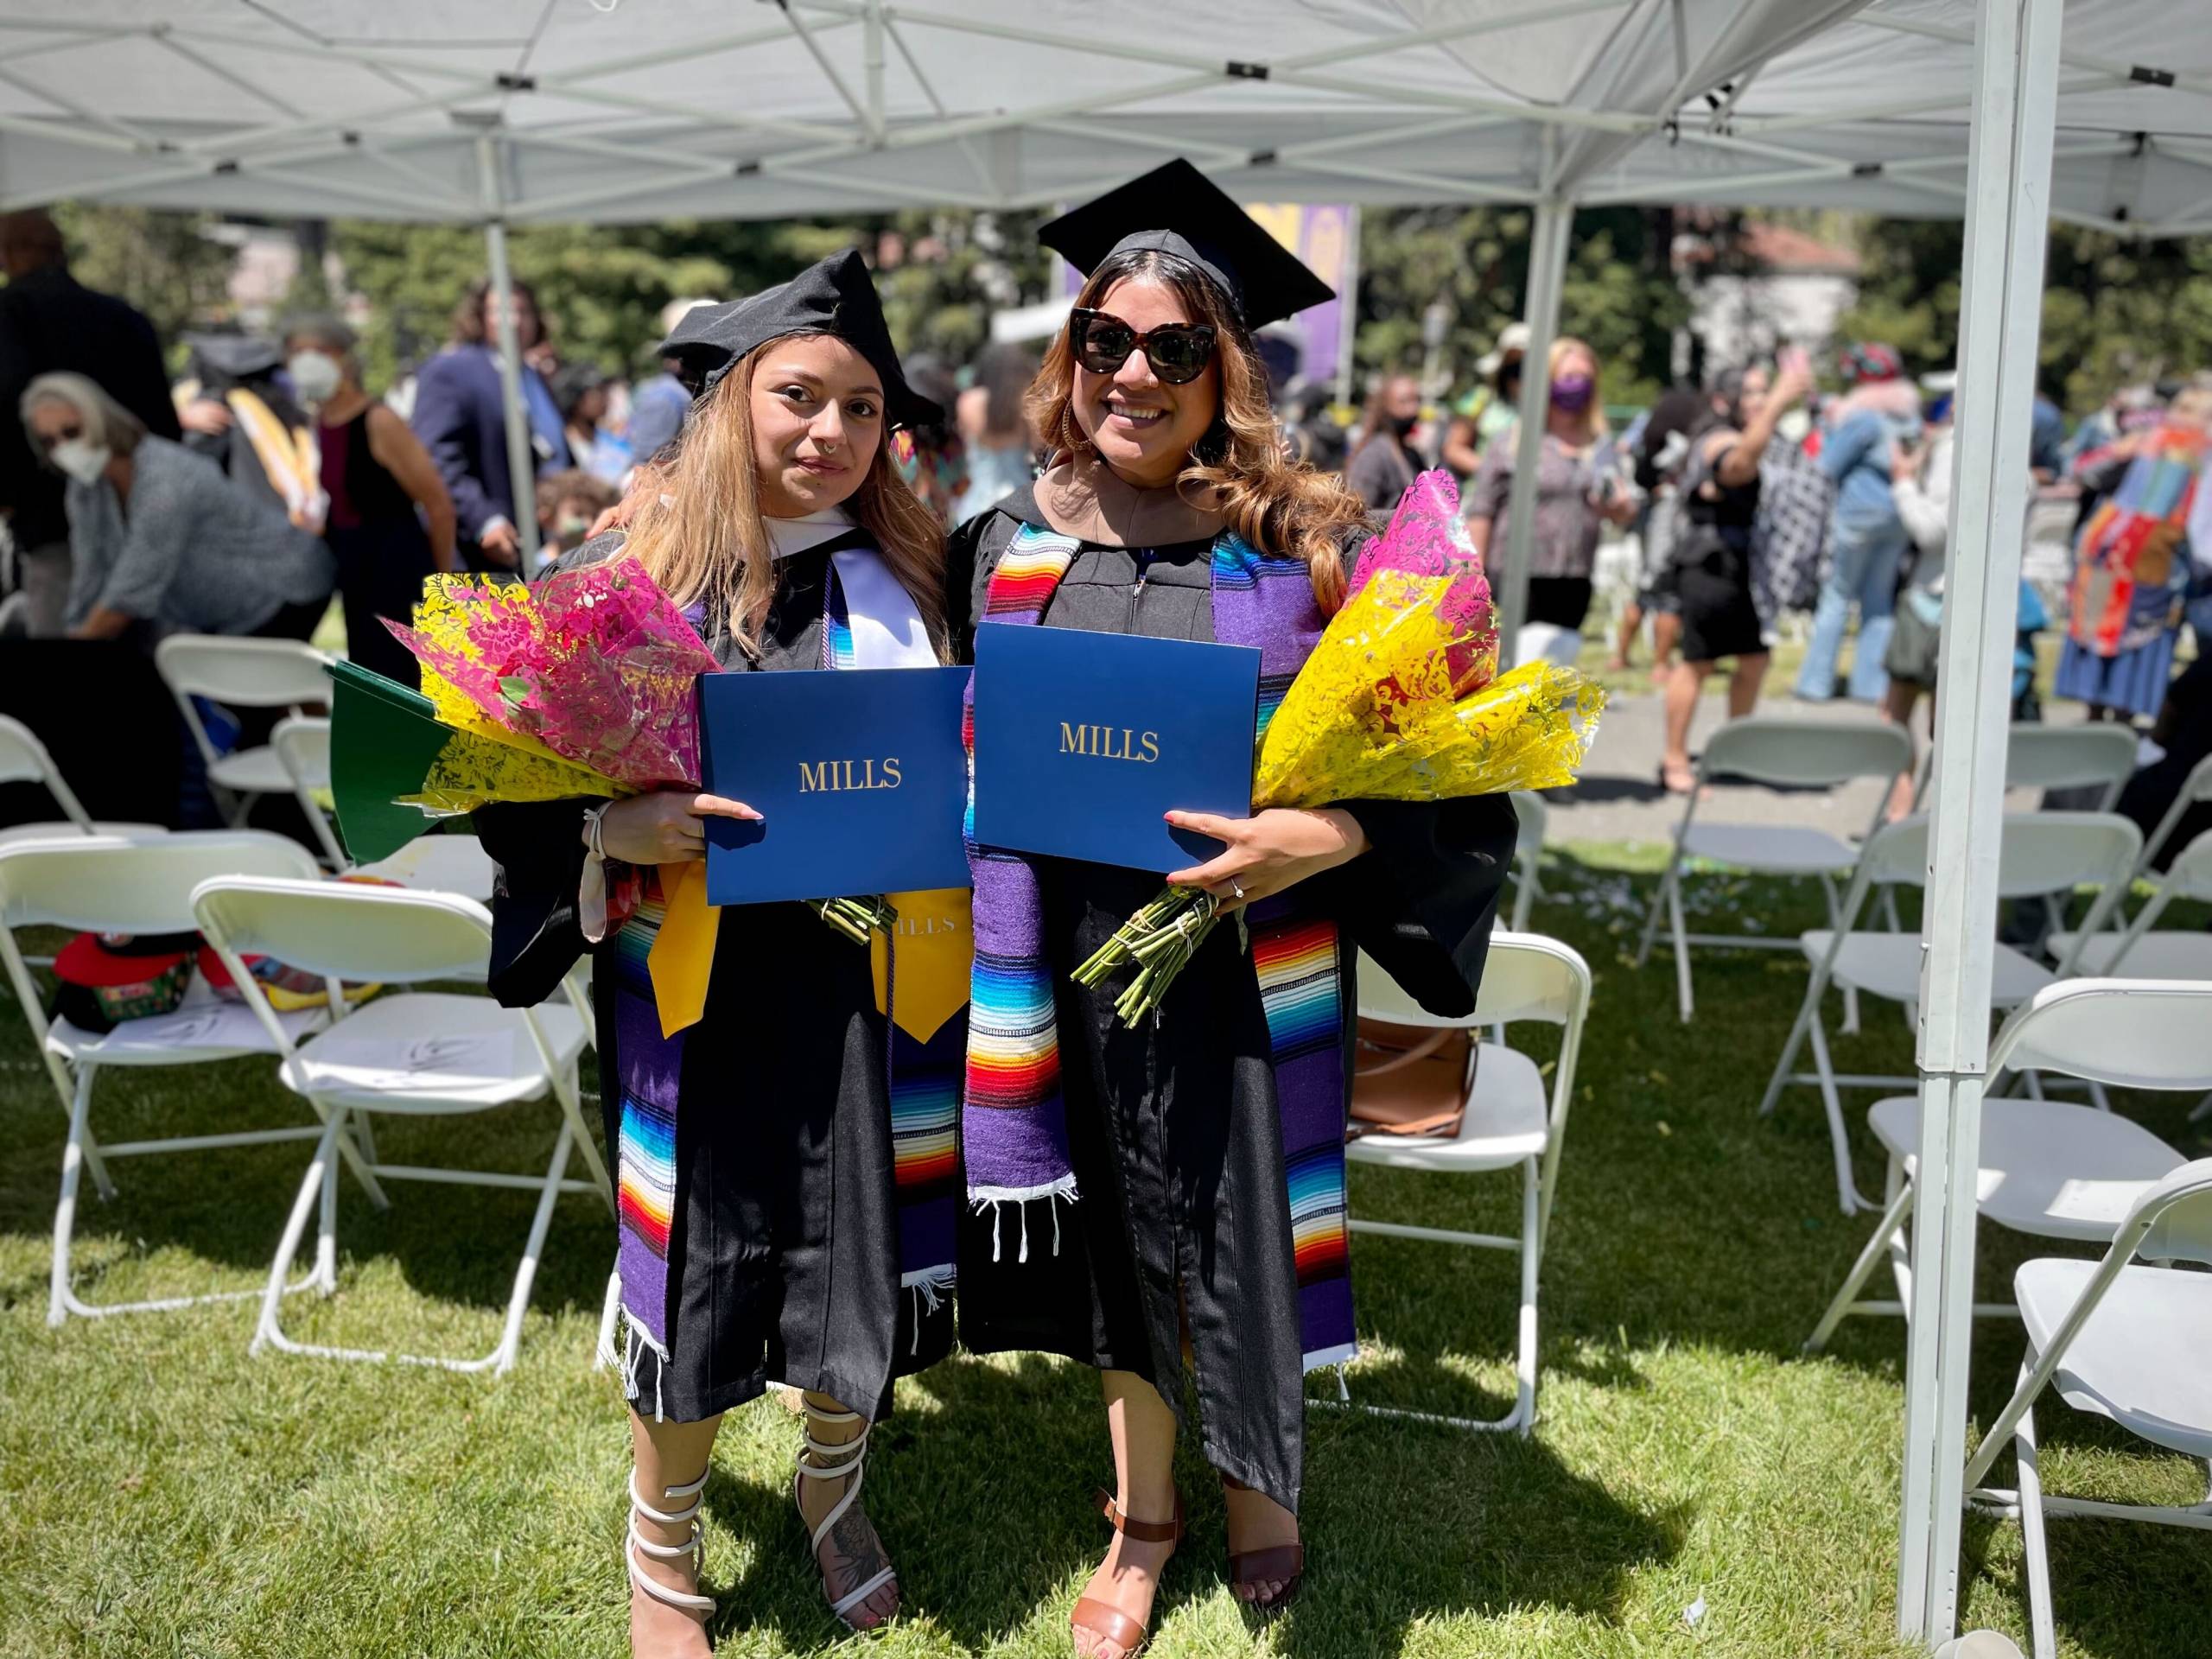 Two people holding their Mills College degrees stand in black cap and gowns holding bouquets of flowers.